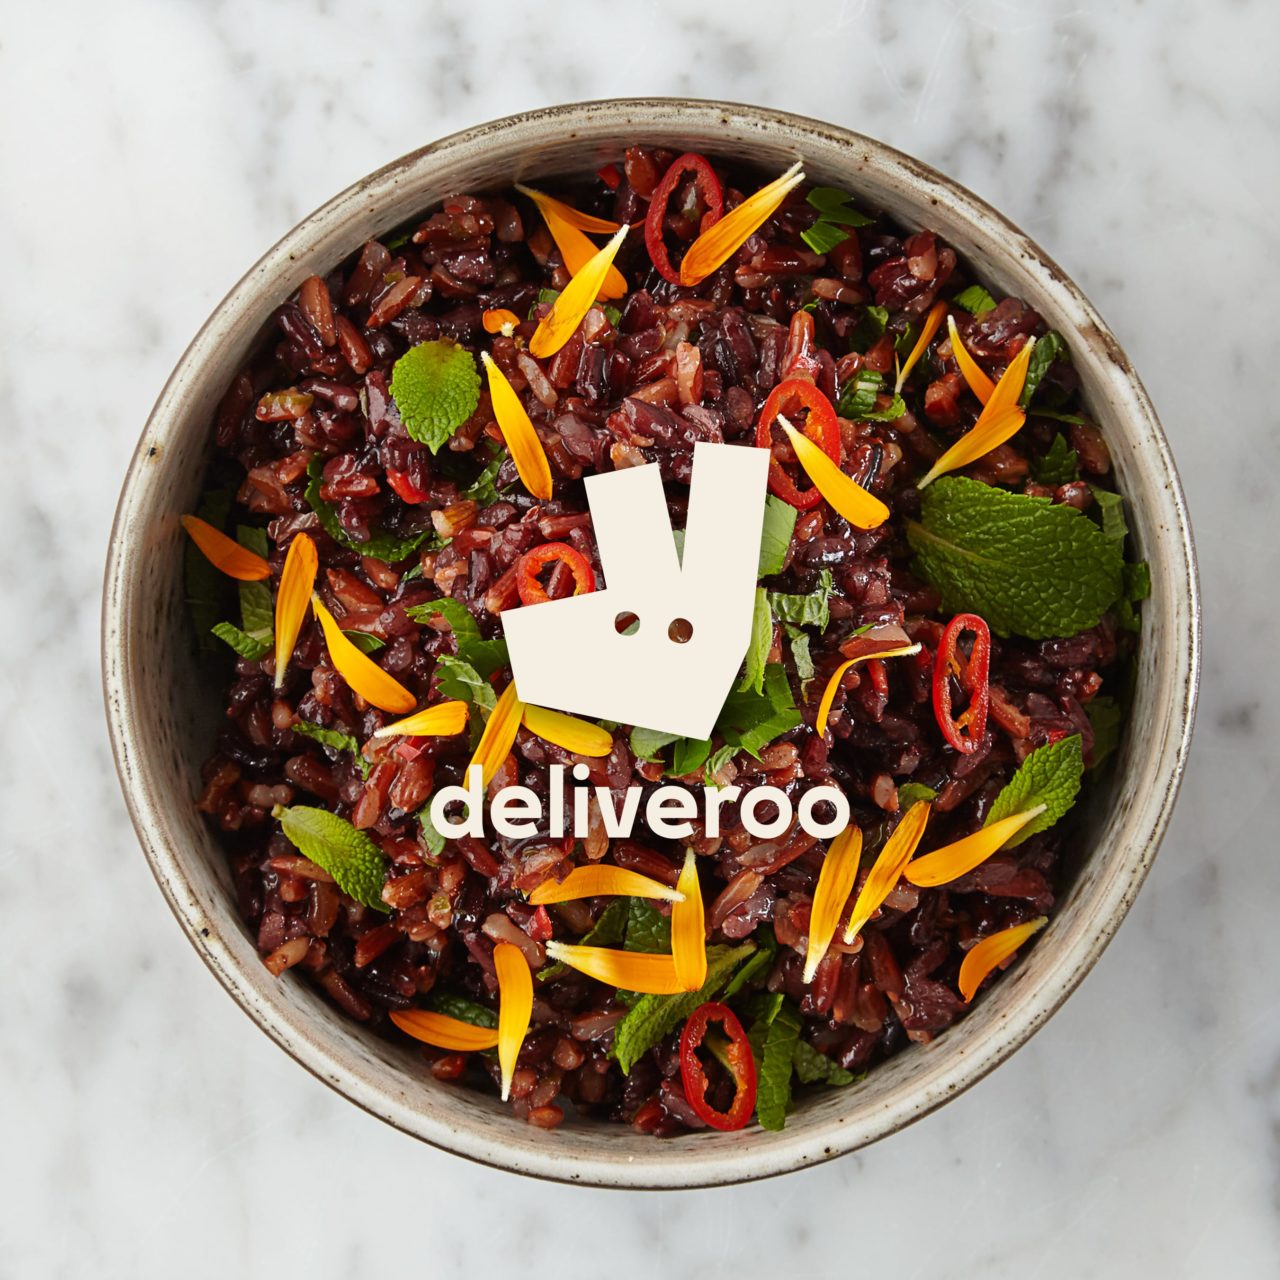 A wild rice dish from The Good Plot available on Deliveroo